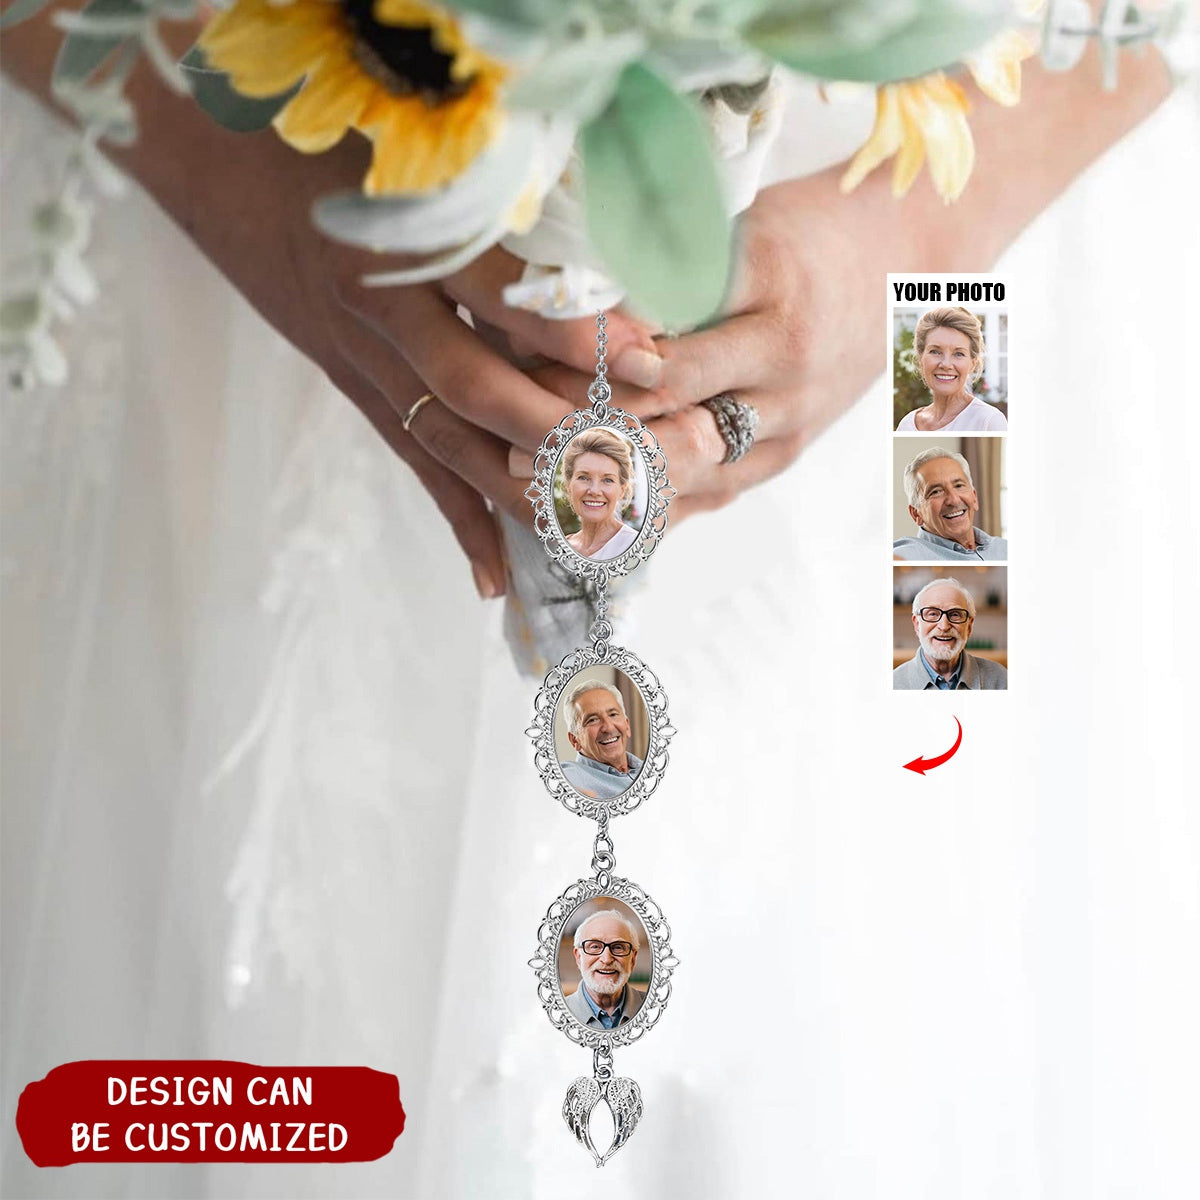 Personalized Memorial Photo Charm for Bridal Bouquet